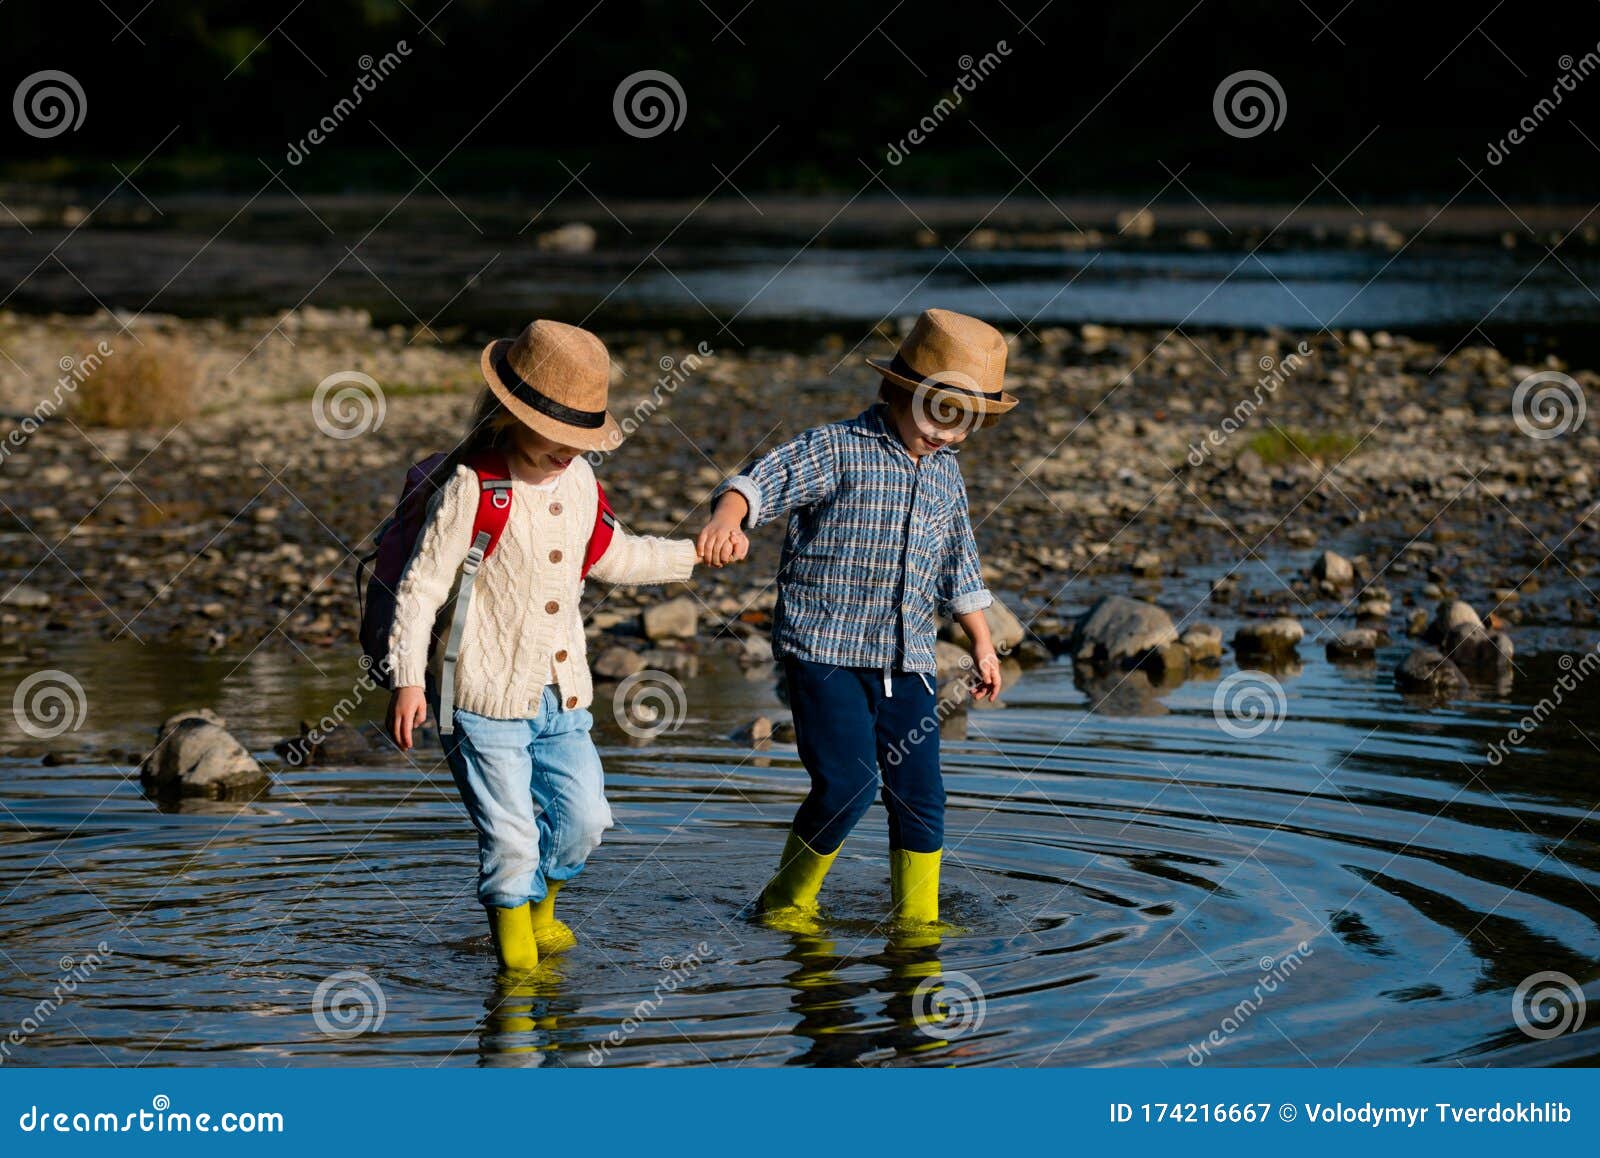 943 Little Boy Girl Best Friends Photos Free Royalty Free Stock Photos From Dreamstime